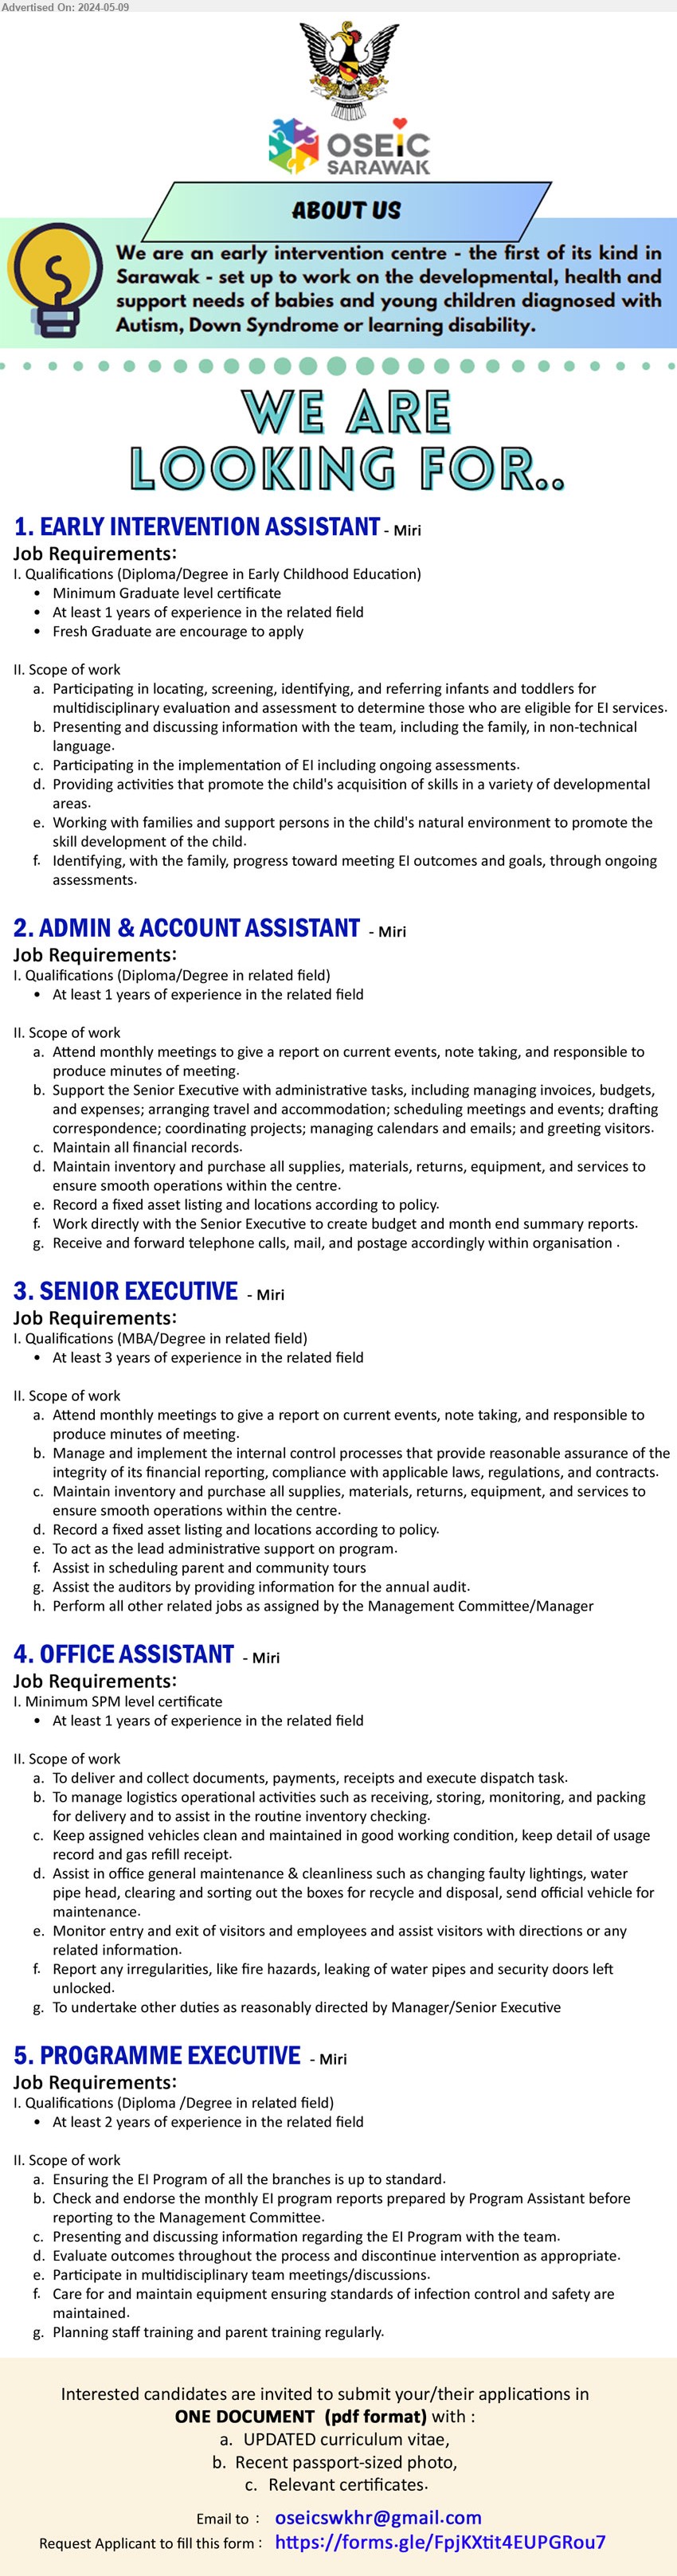 OSEIC SARAWAK - 1. EARLY INTERVENTION ASSISTANT  (Miri), Diploma/Degree in Early Childhood Education,...
2. ADMIN & ACCOUNT ASSISTANT (Miri), Diploma/Degree, 1 yr. exp., ,...
3. SENIOR EXECUTIVE (Miri), MBA/Degree, 3 yrs. exp., ,...
4. OFFICE ASSISTANT (Miri), SPM, At least 1 years of experience in the related field,...
5. PROGRAMME EXECUTIVE (Miri), Diploma /Degree, 2 yrs. exp.,...
Email resume to ...
